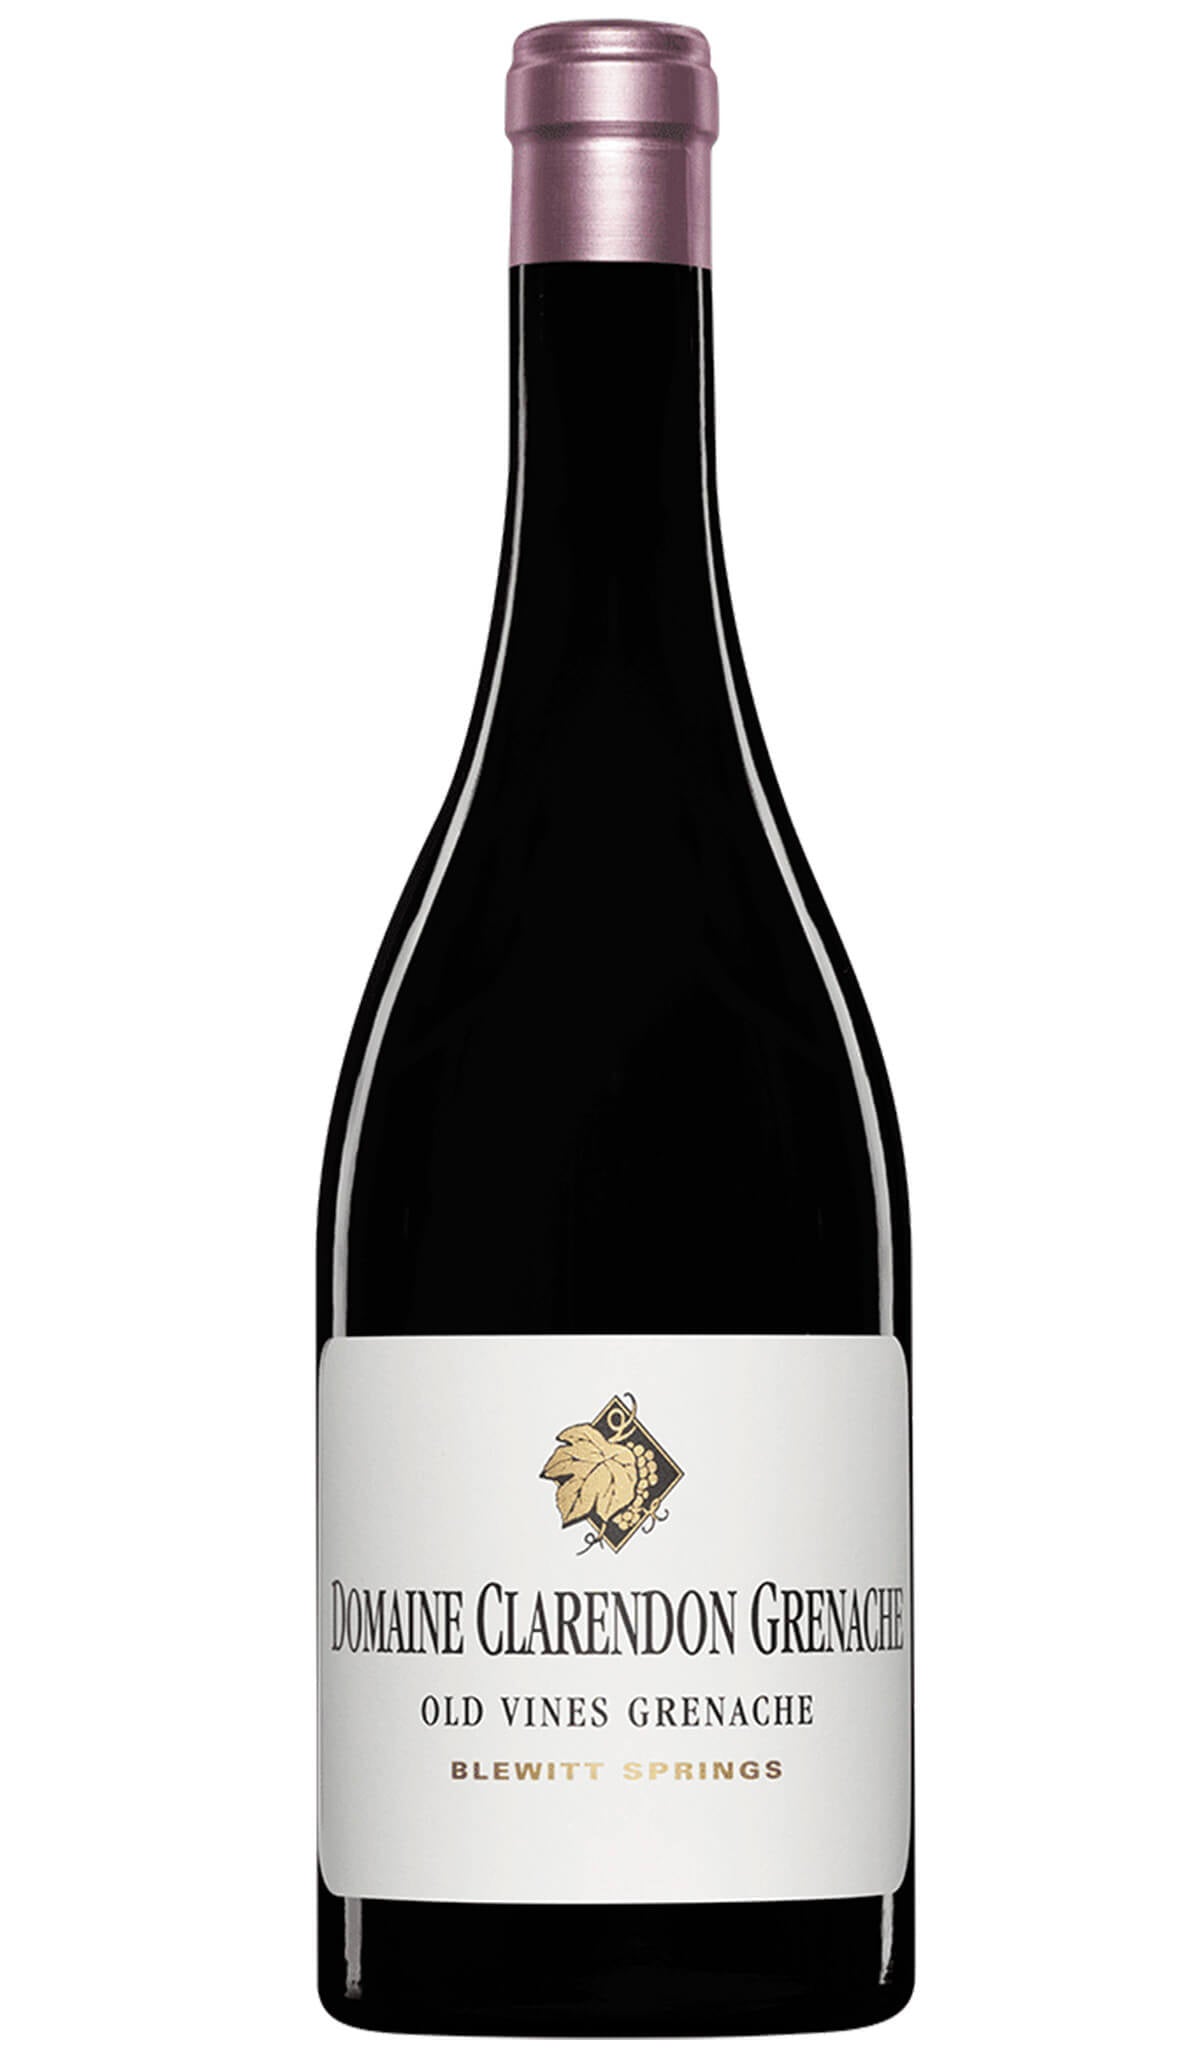 Find out more, explore the range and buy Domaine Clarendon Grenache 2017 (Blewitt Springs) available online at Wine Sellers Direct - Australia's independent liquor specialists.